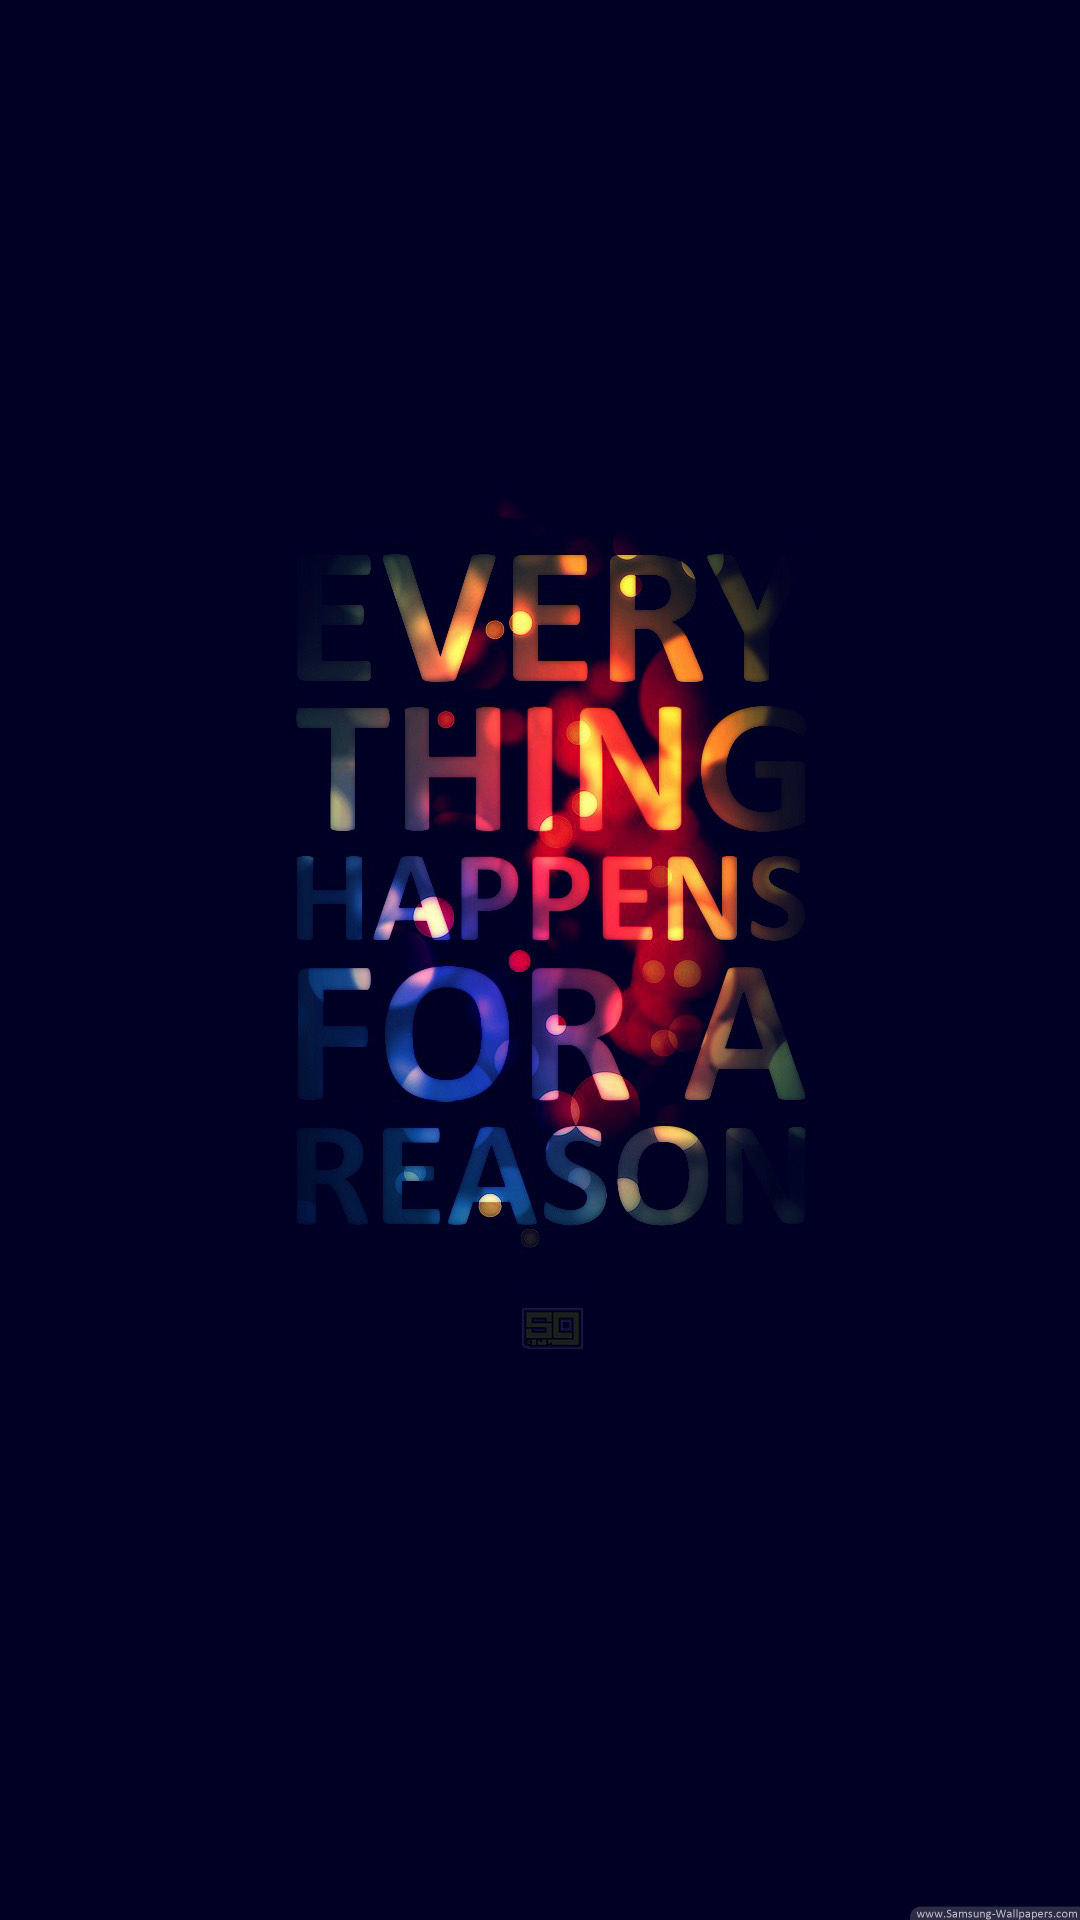 Everything Happens For A Reason 名言スマホ壁紙 Iphone11 スマホ